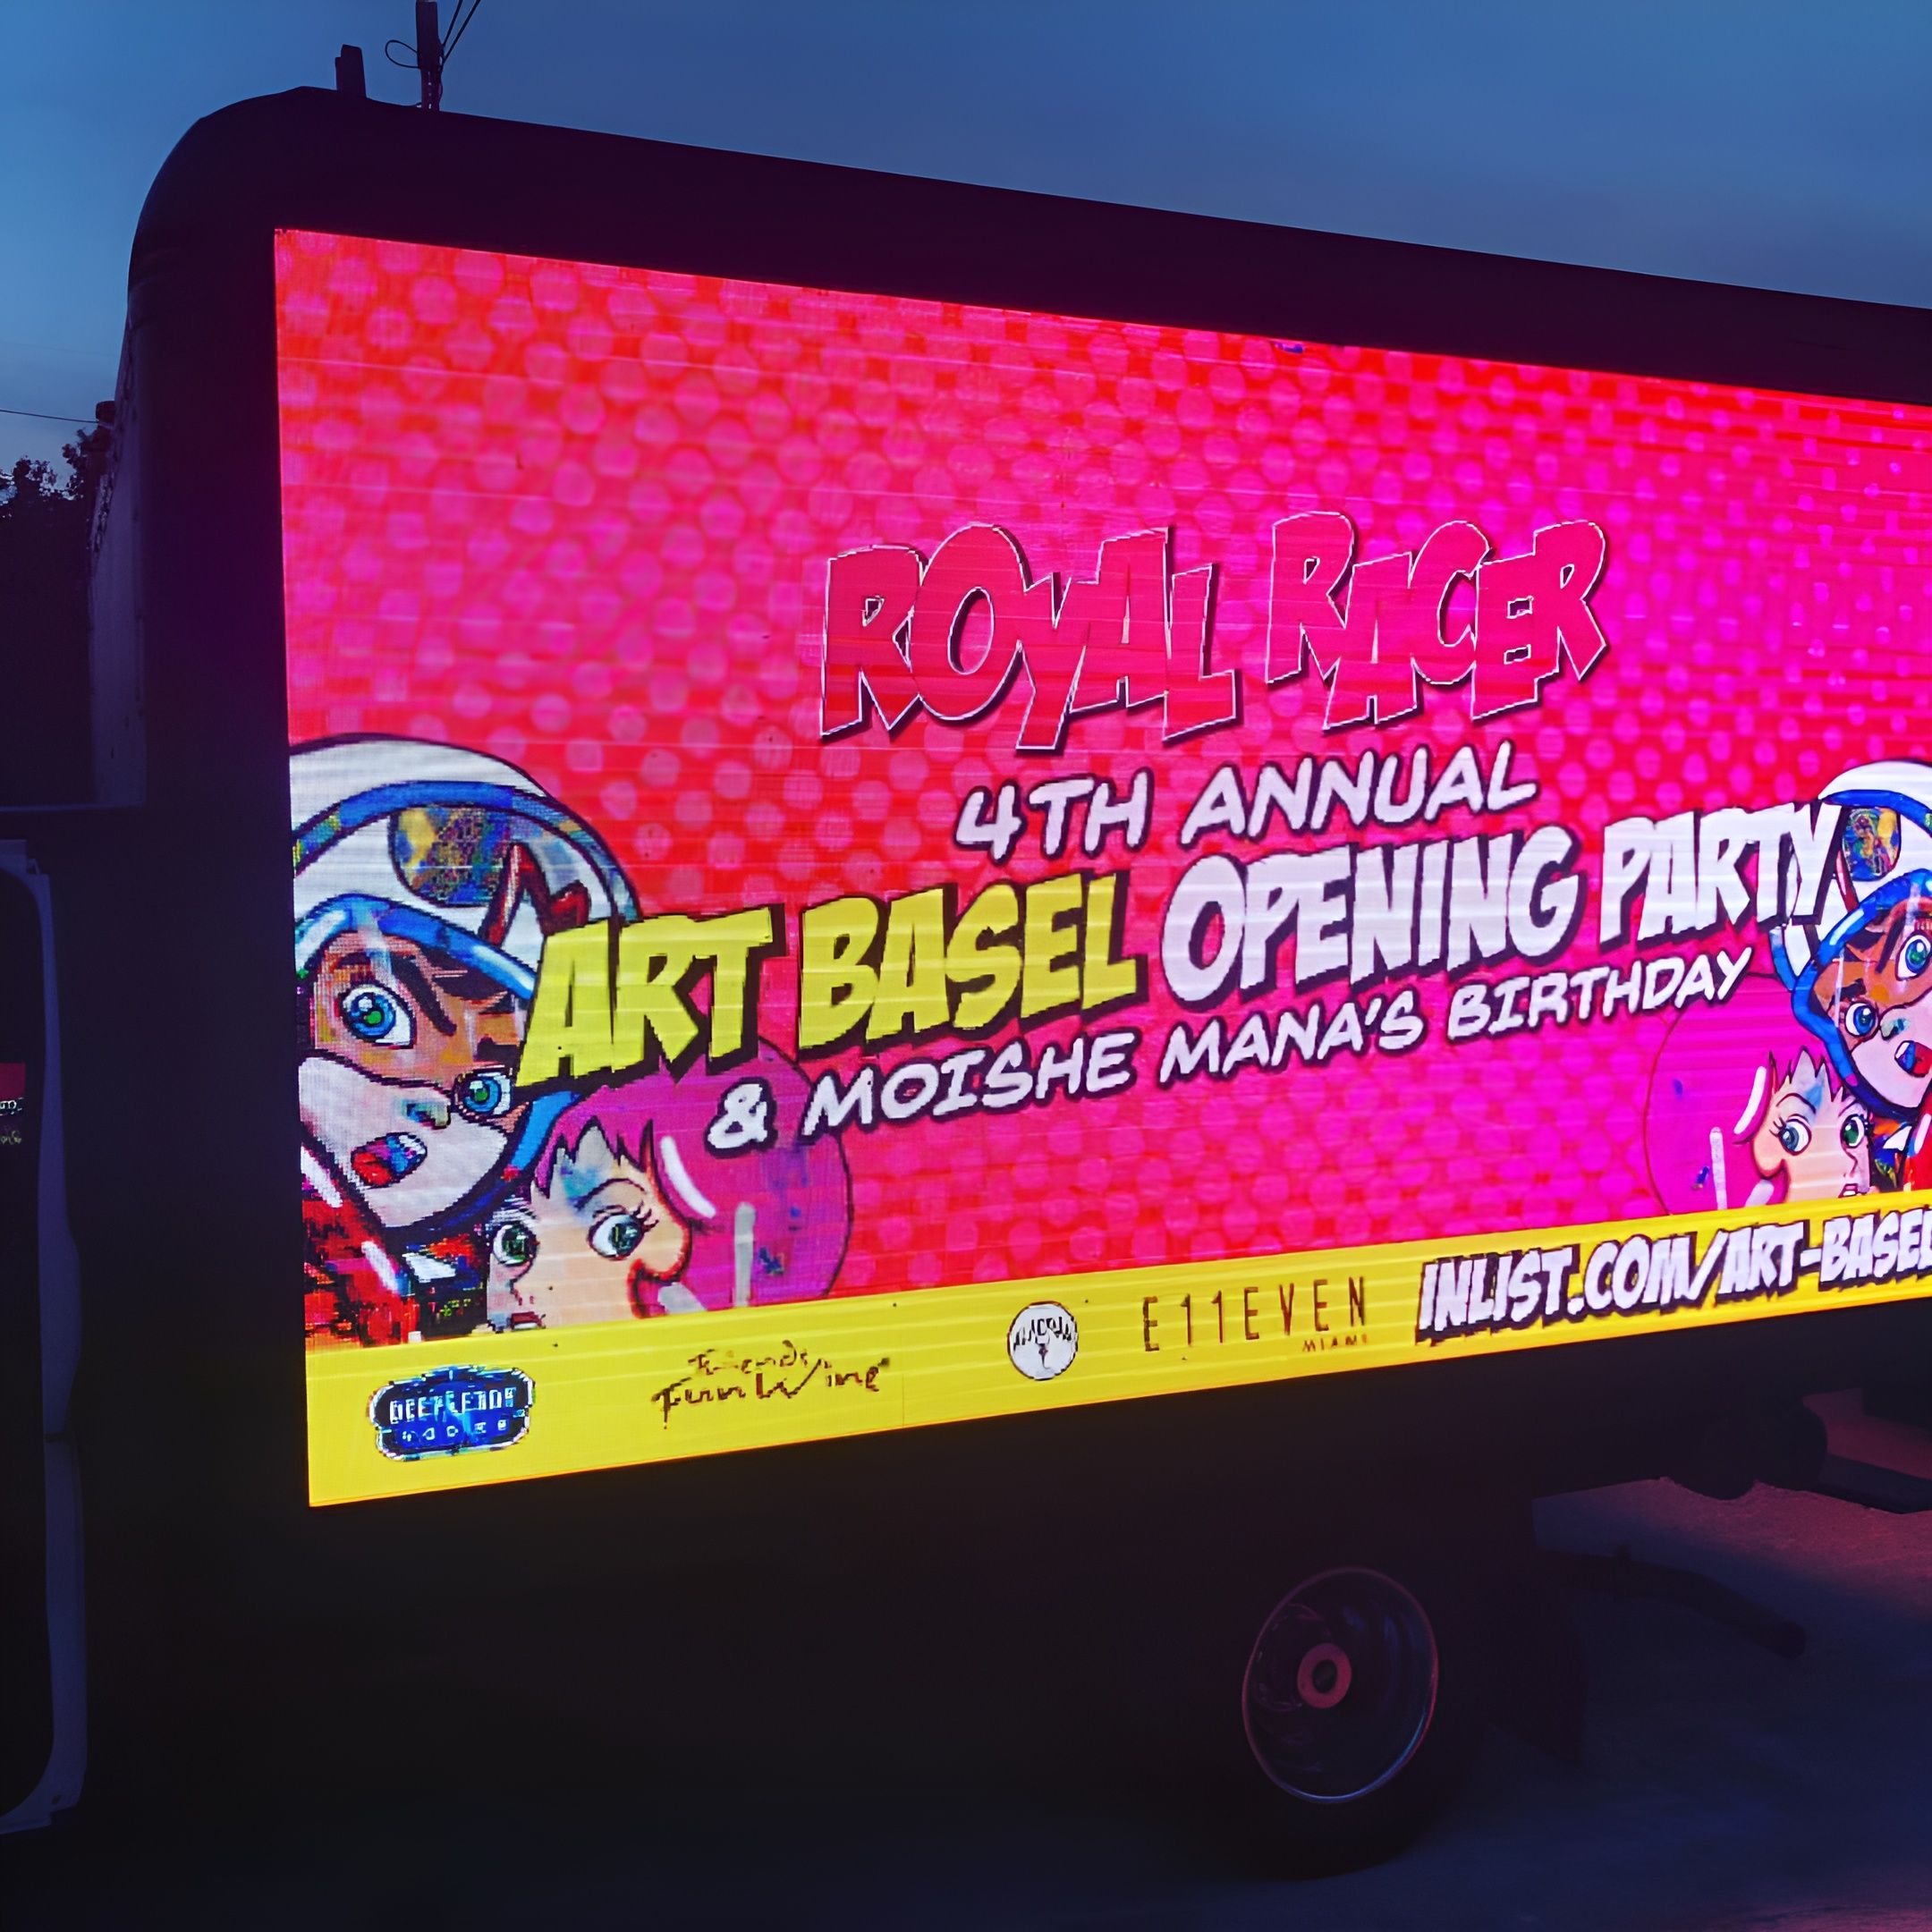 Image of a captivating mobile truck advertising campaign